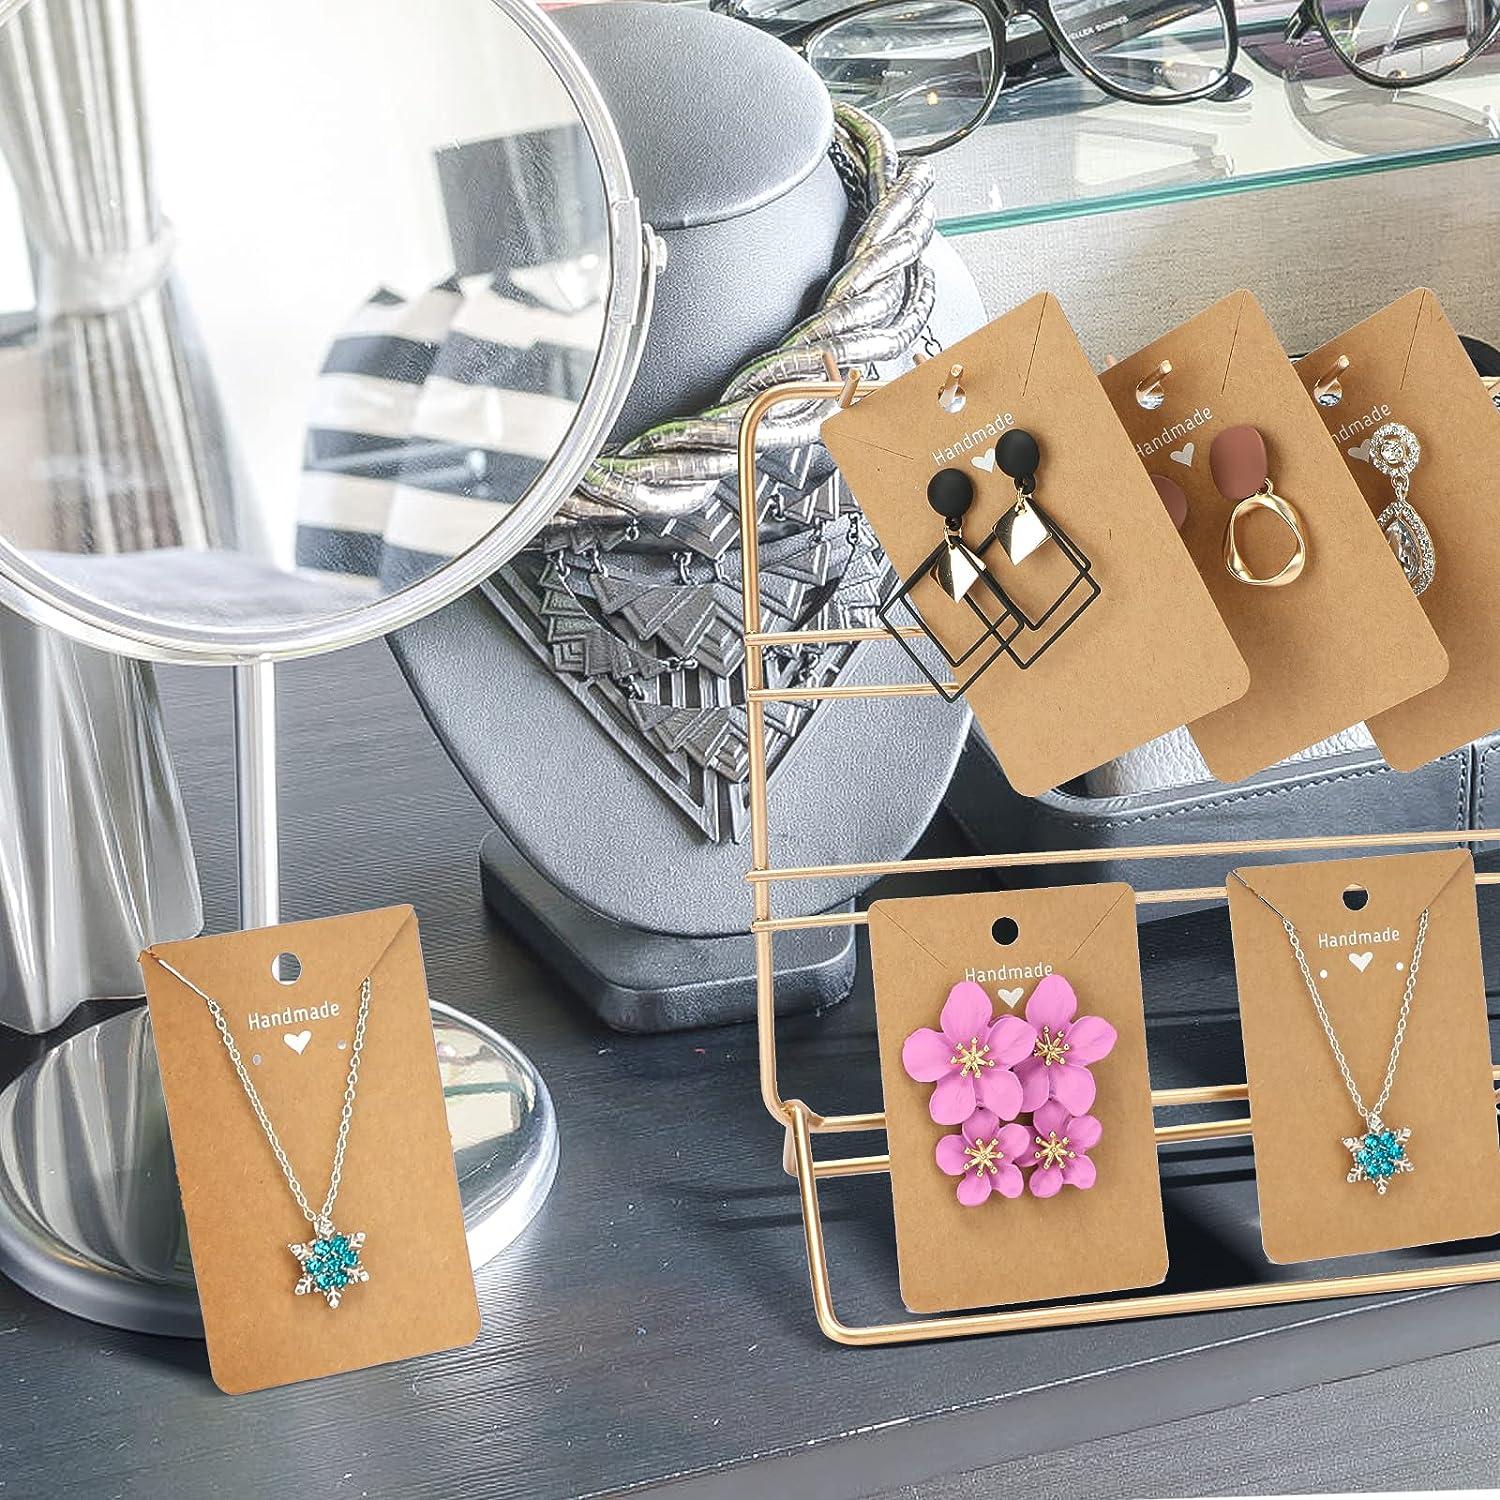 Kraft Paper Jewelry Display Cards for Earrings, Necklaces, Studs